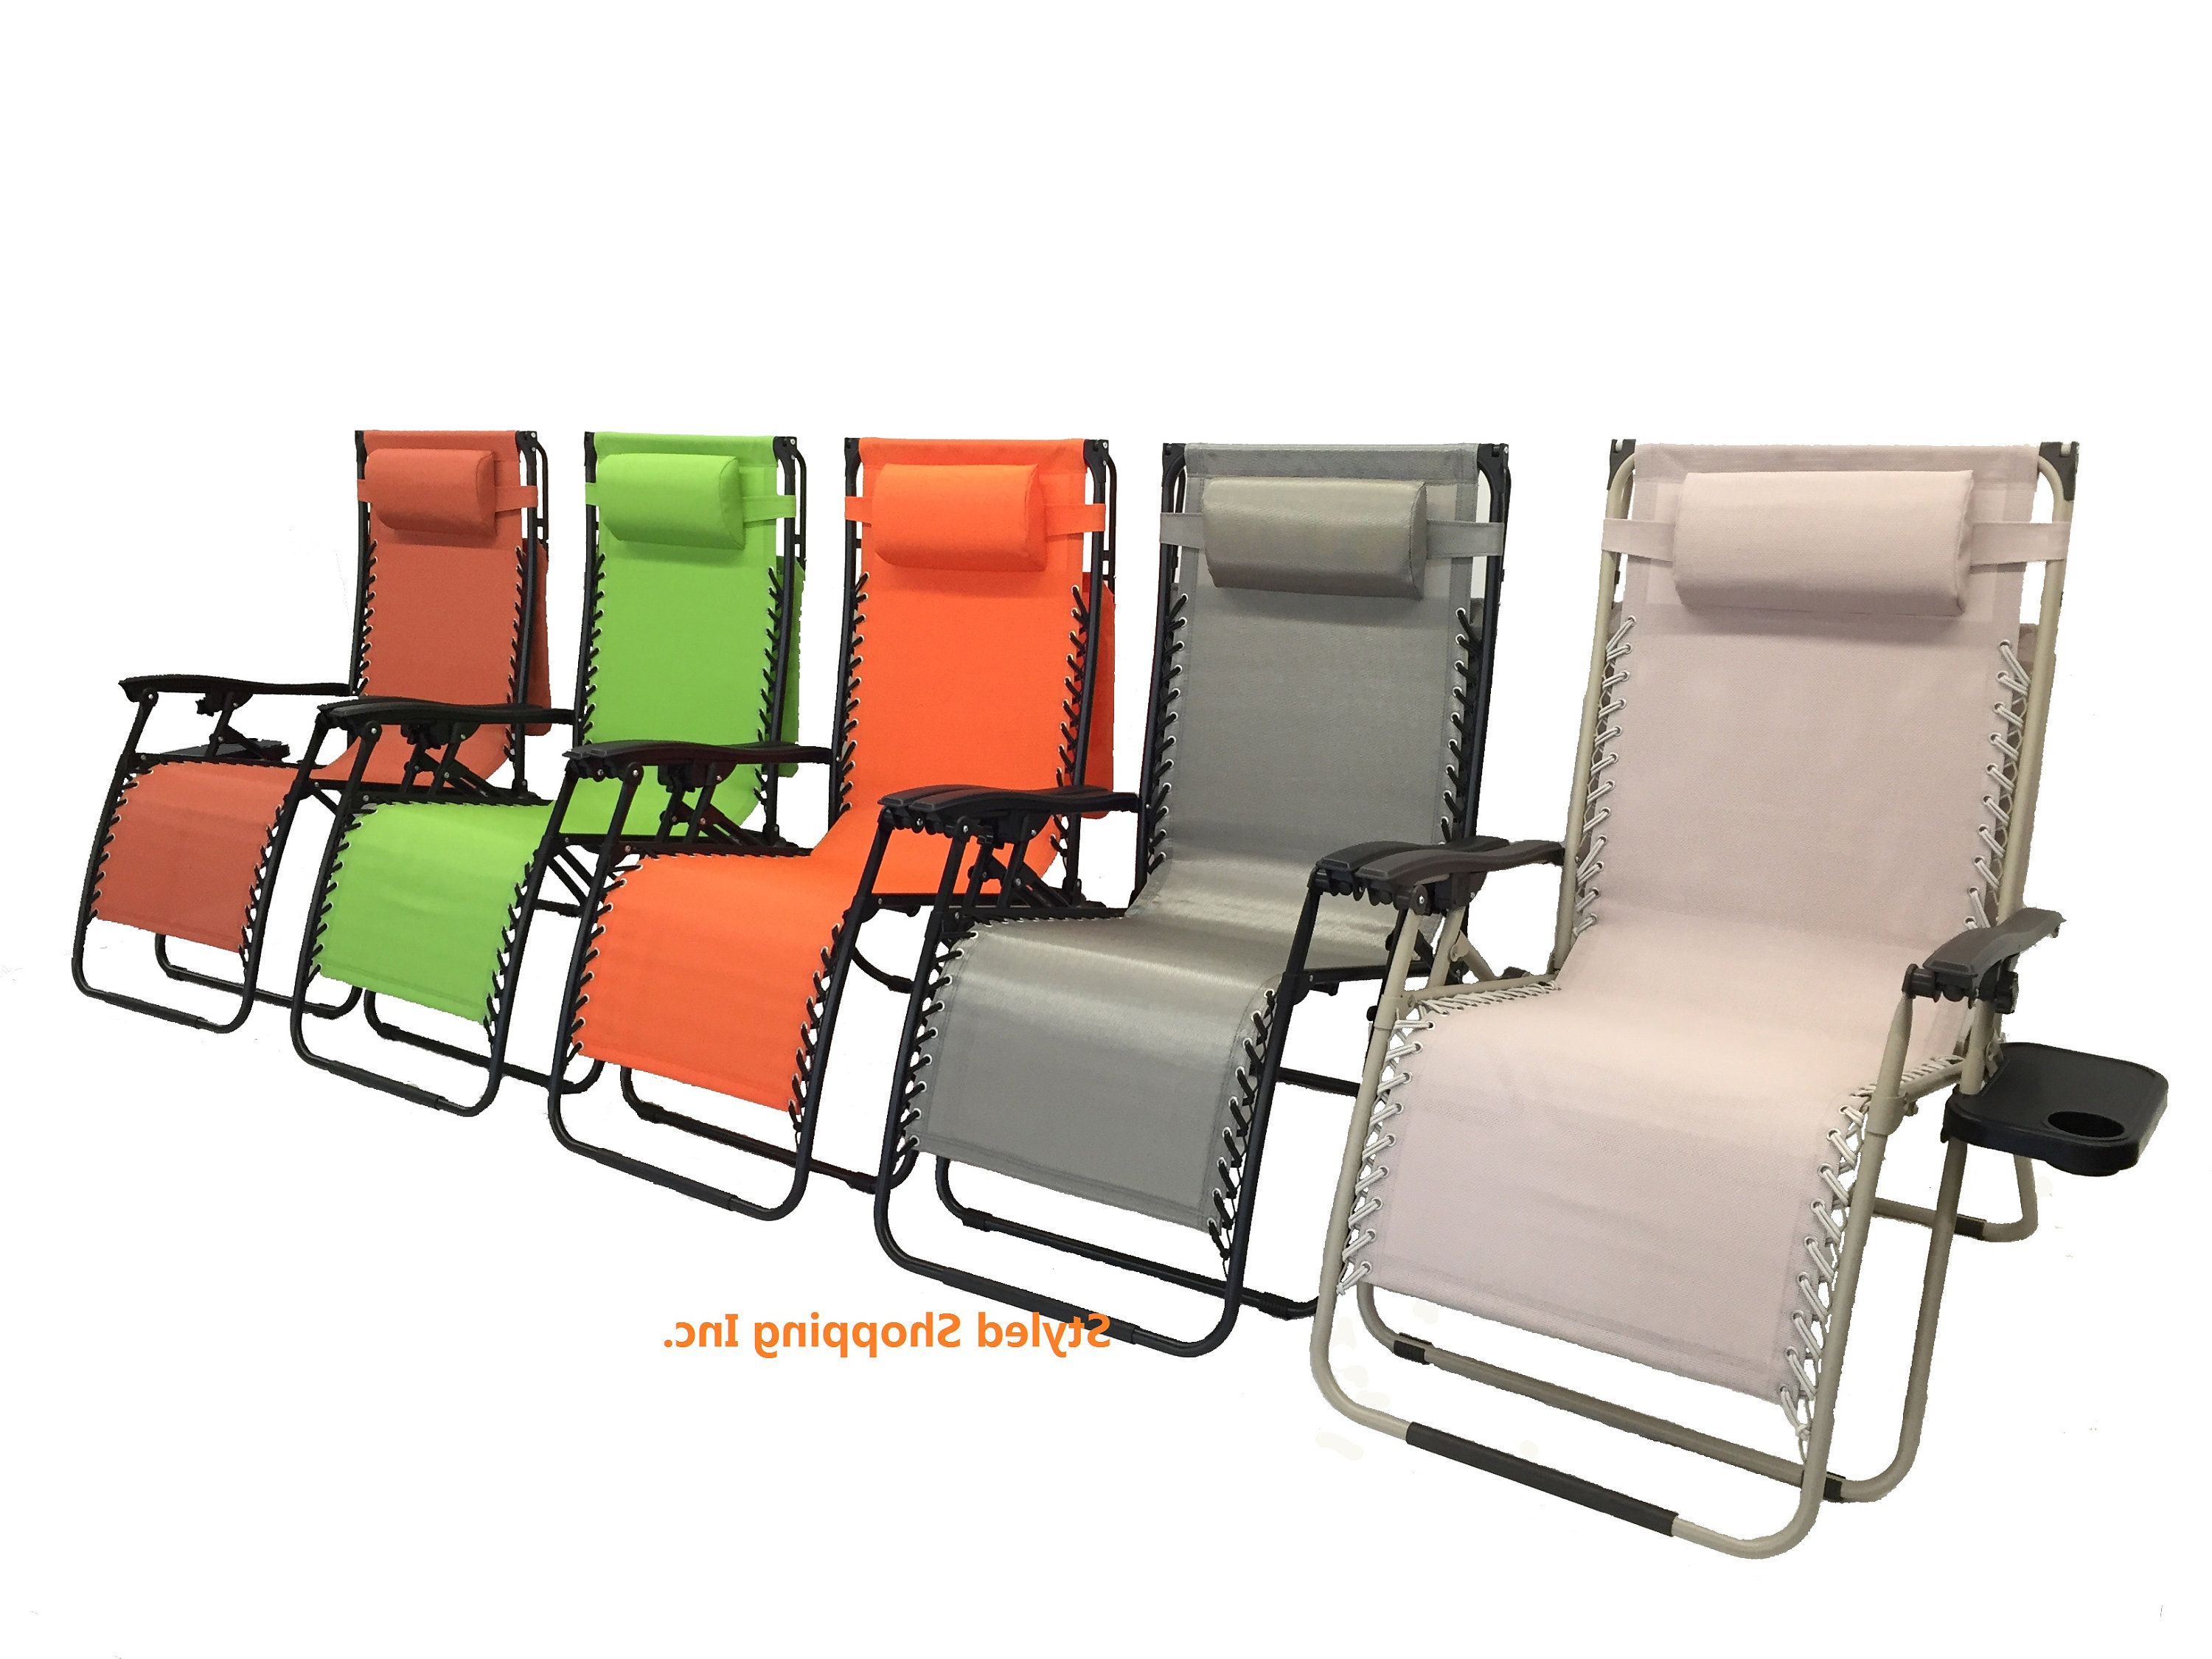 Famous Deluxe Extra Large Oversized Zero Gravity Chair With Canopy And Tray Intended For Oversized Extra Large Chairs With Canopy And Tray (View 5 of 25)